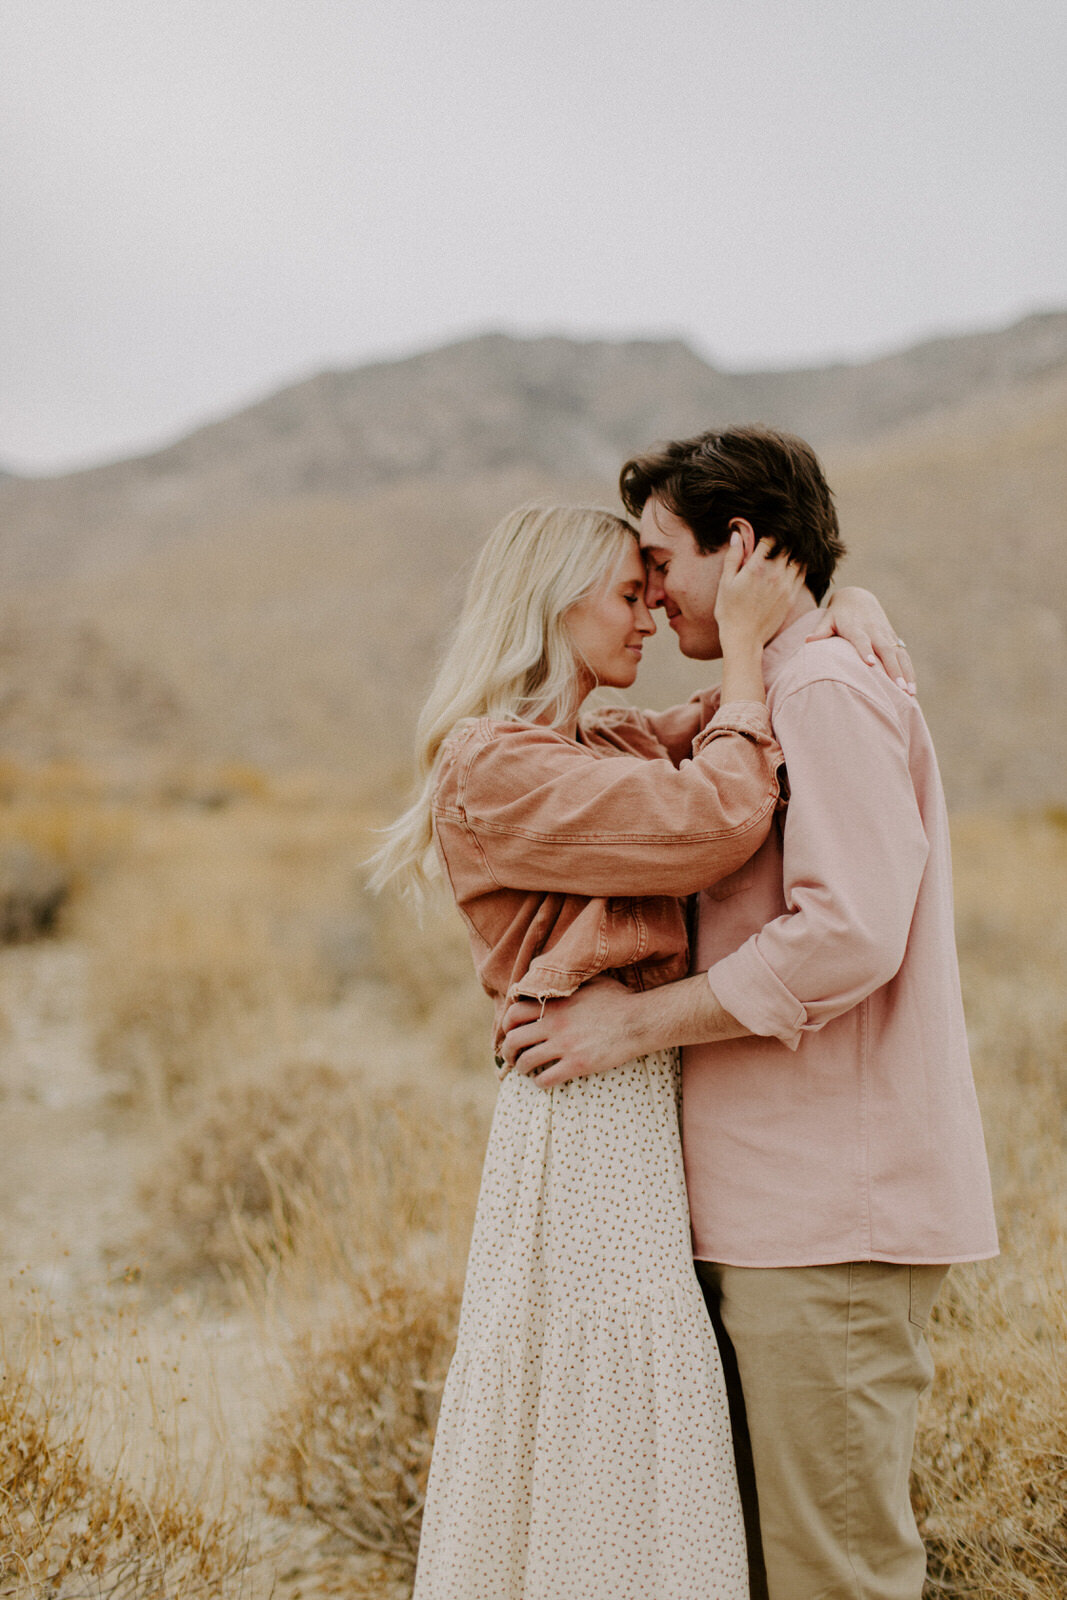 Brianna-Broyles-Photography-Pink-Palm-Springs-Engagement-Session-5.jpg